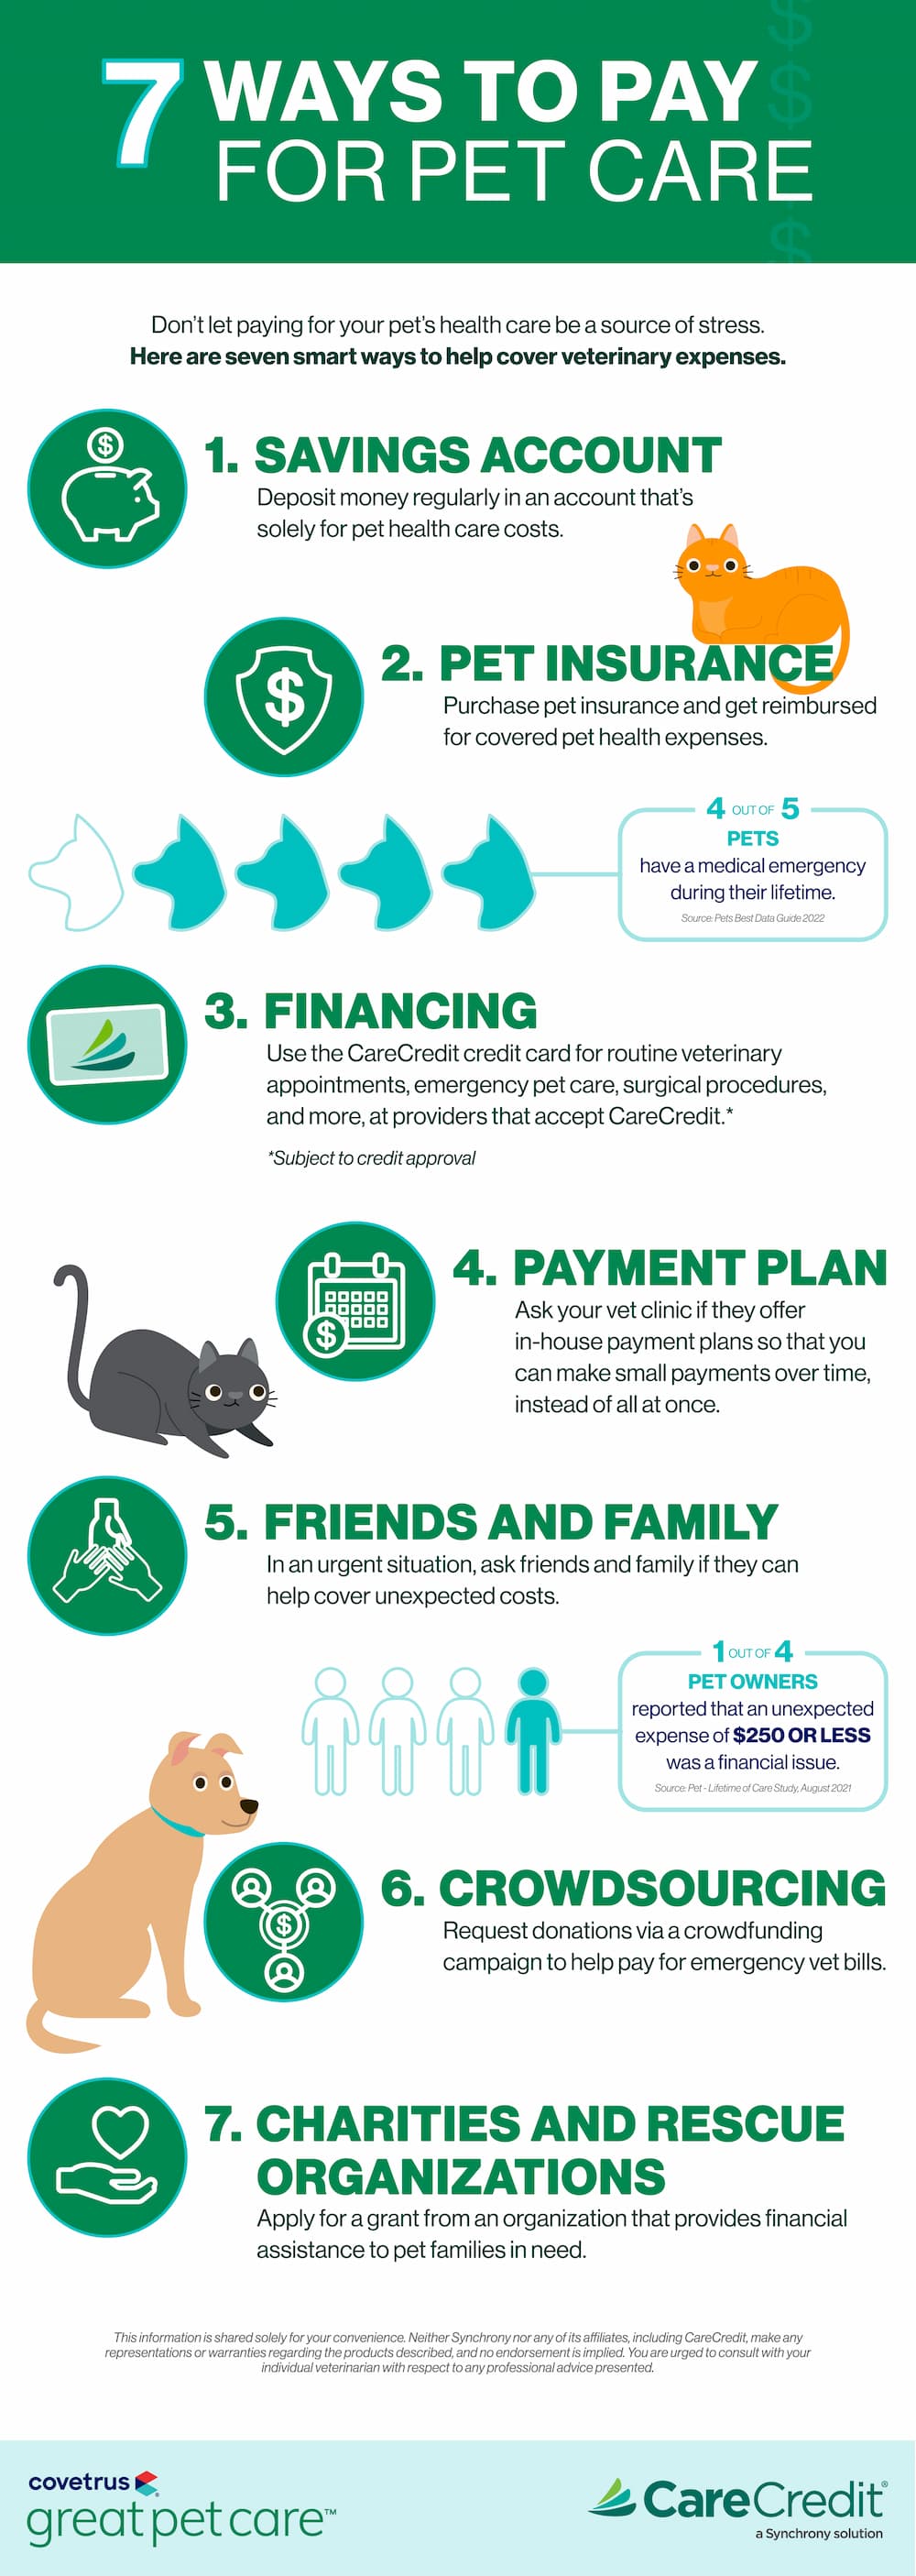 Ways to Pay for Pet Care infographic